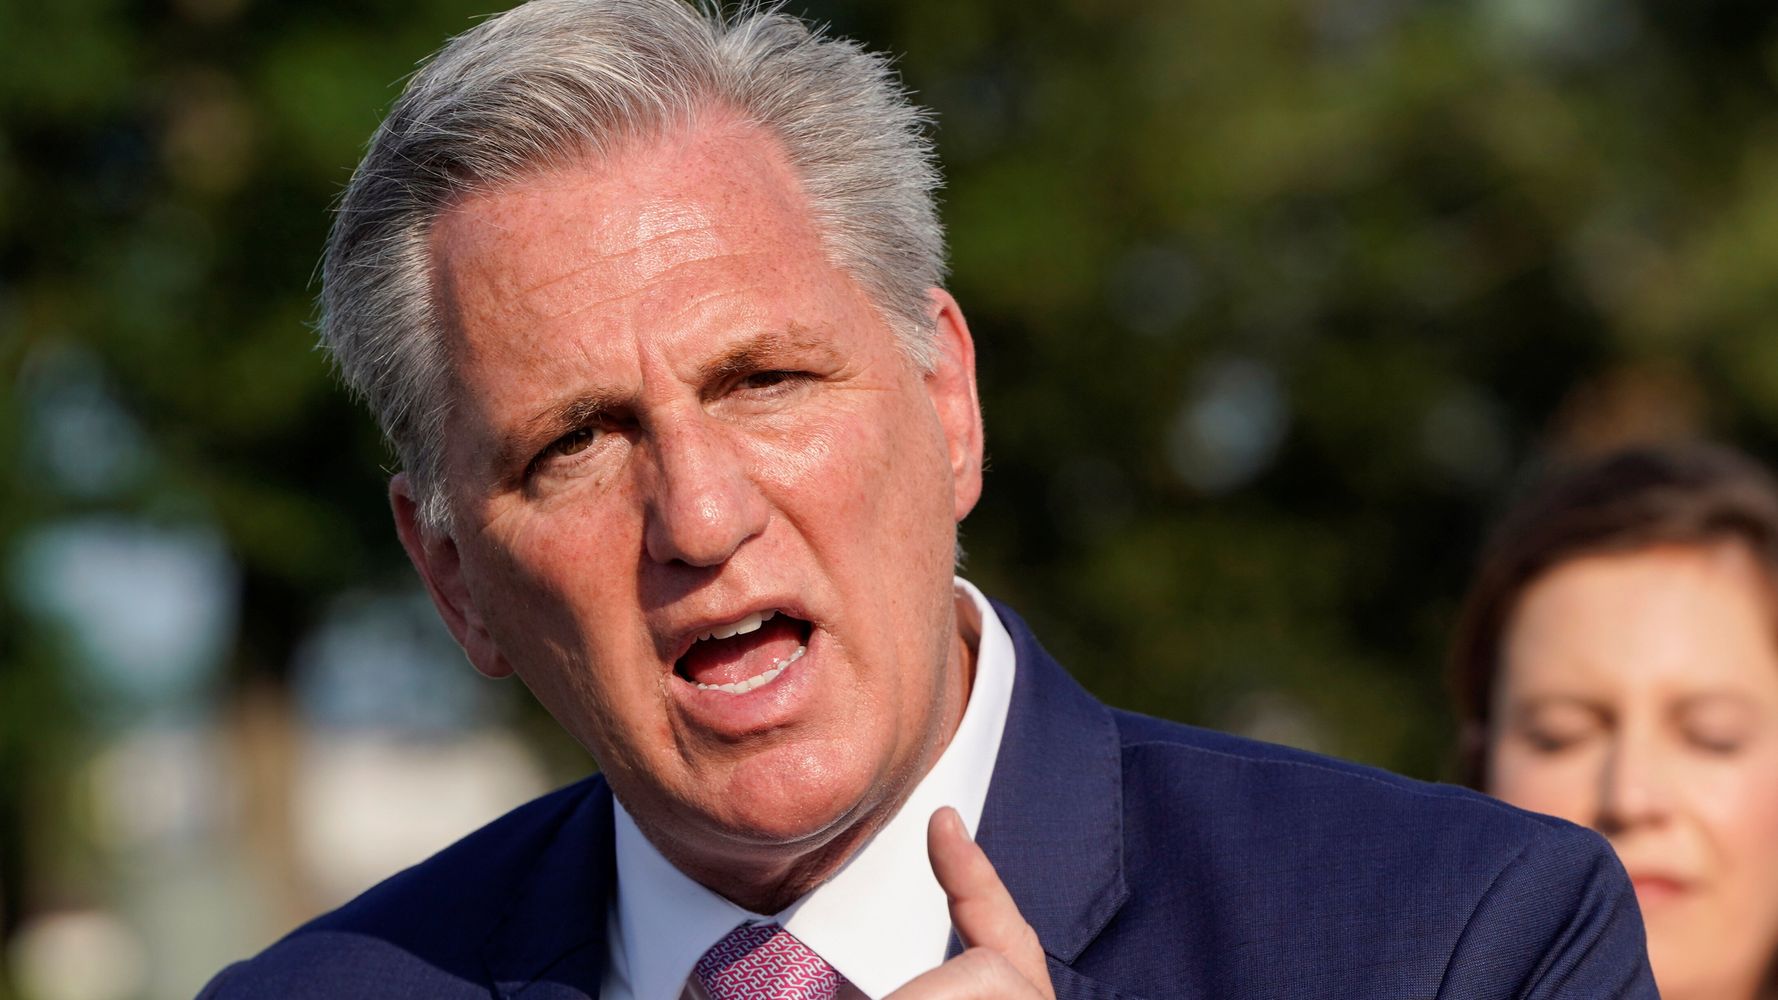 Kevin McCarthy tore himself up on Twitter after a strange three-word capitalized vaccine